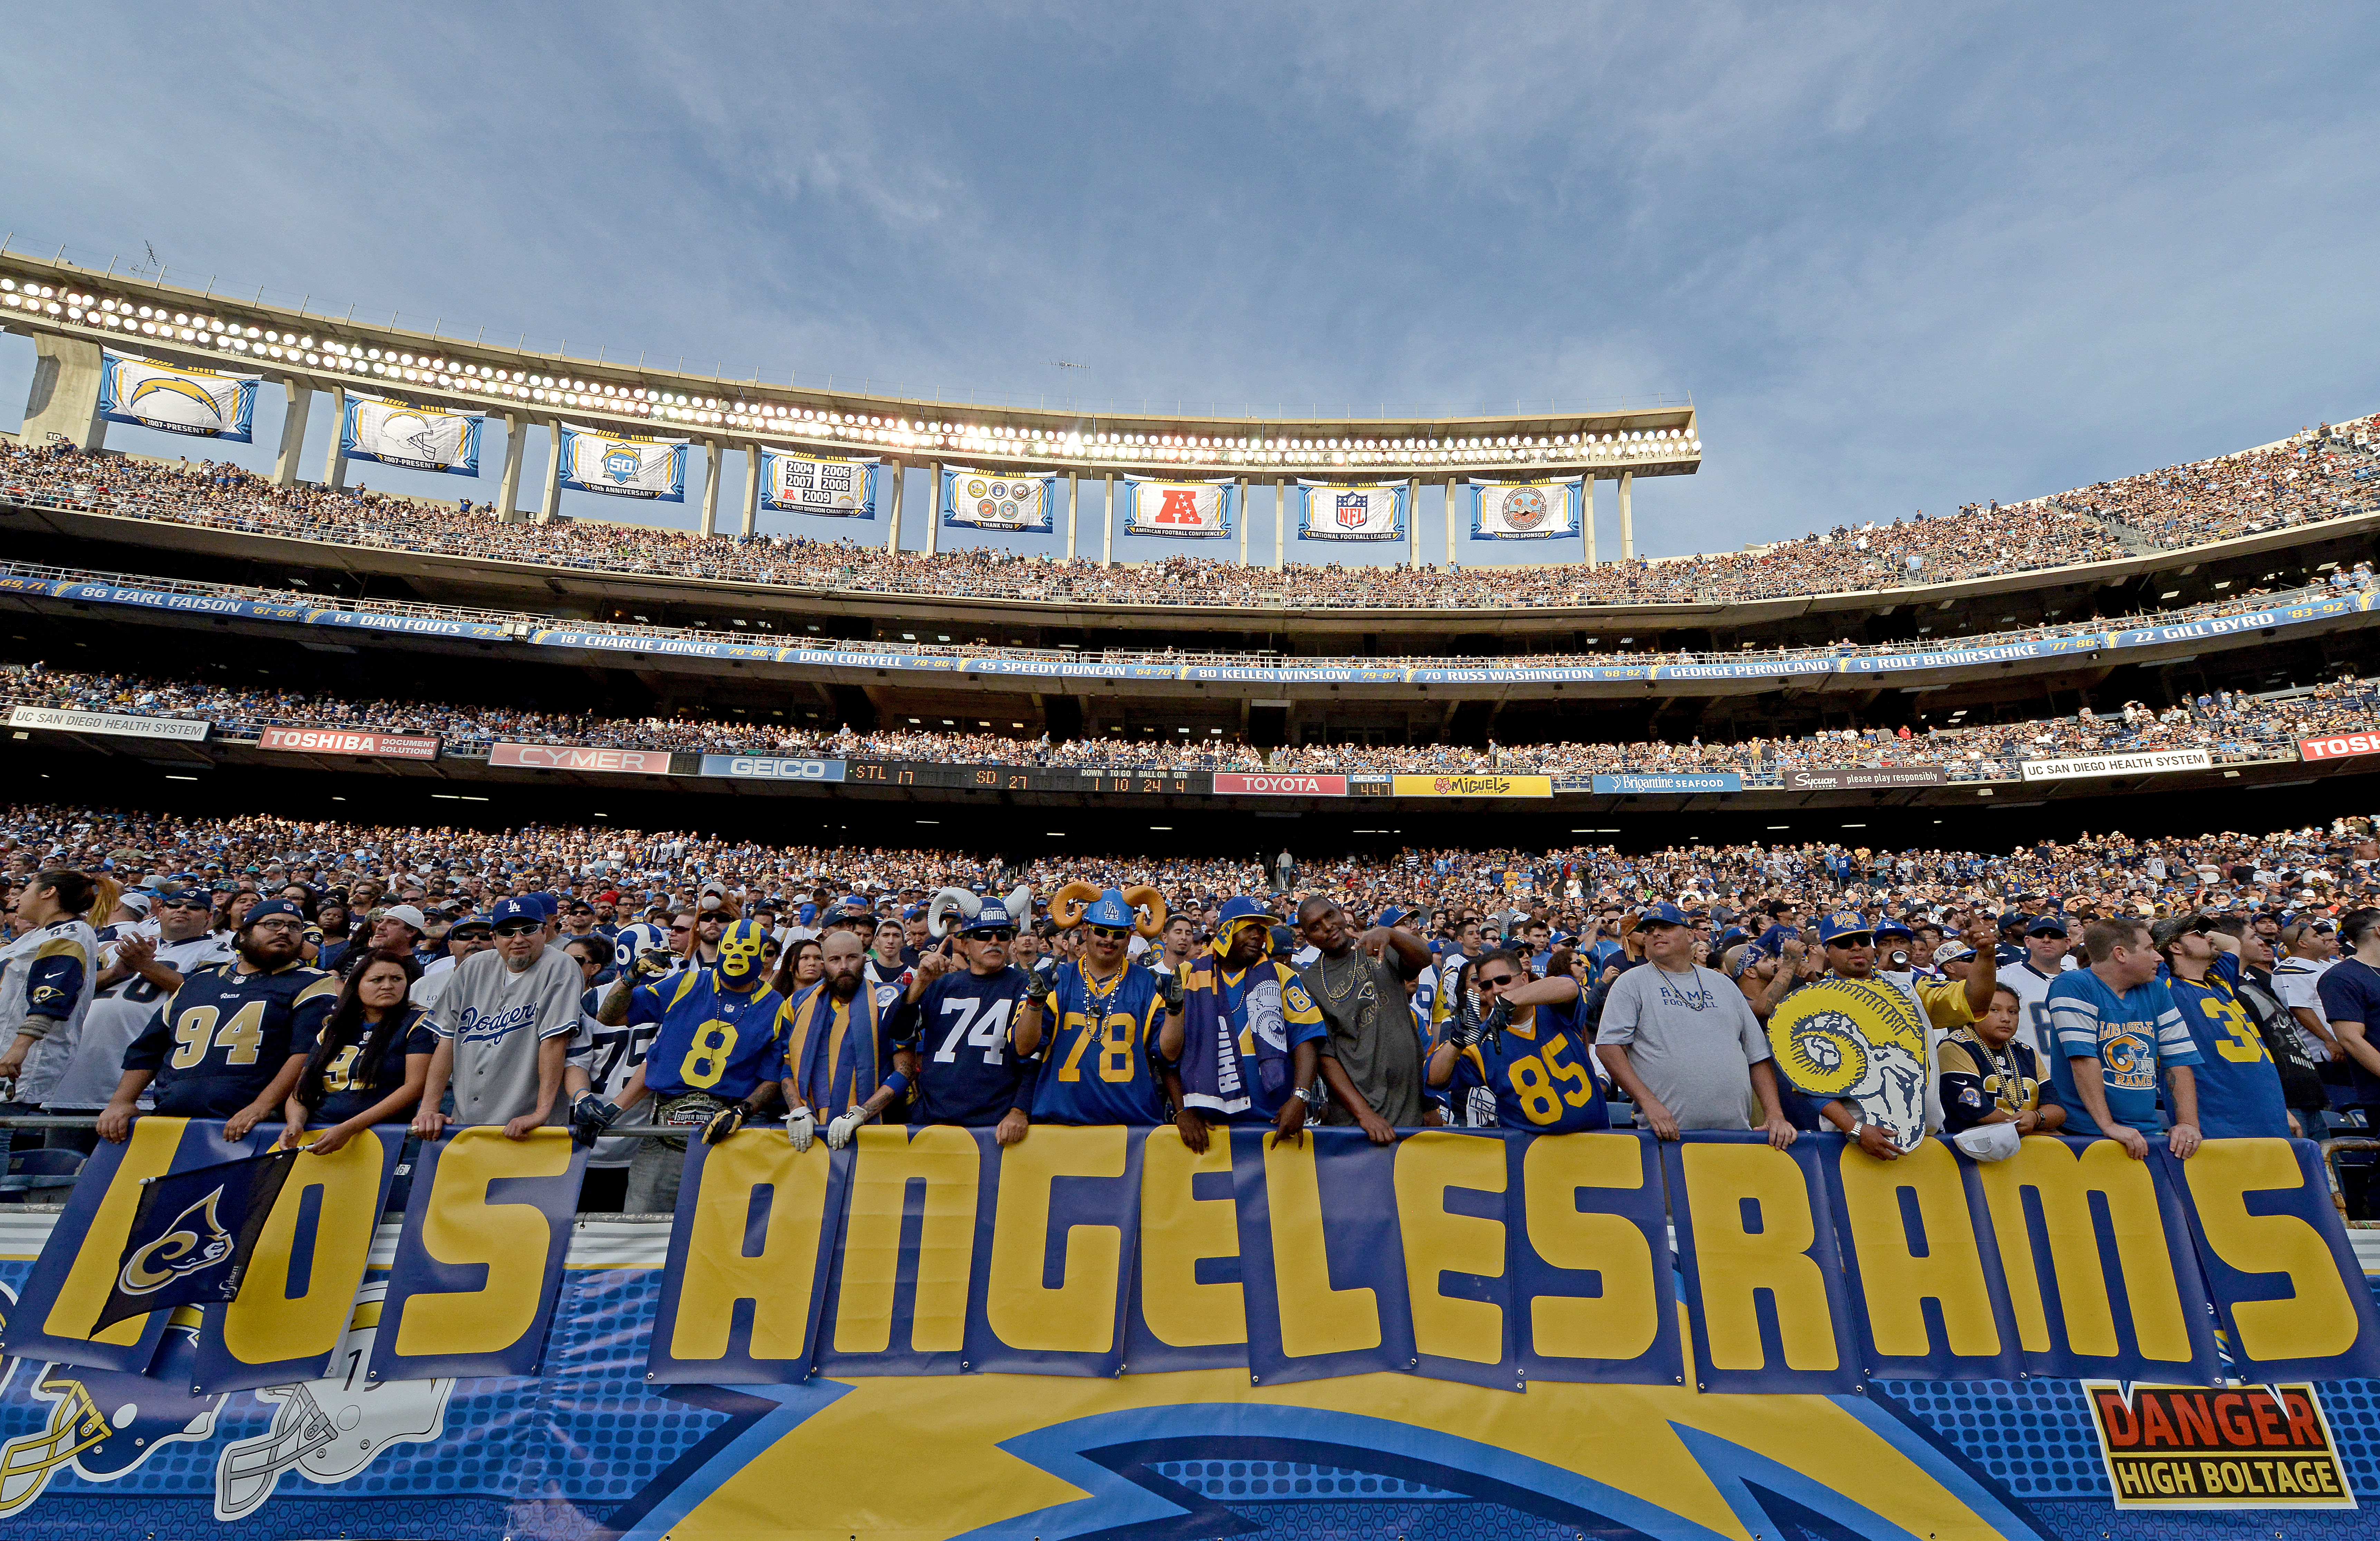 St. Louis Rams v San Diego Chargers